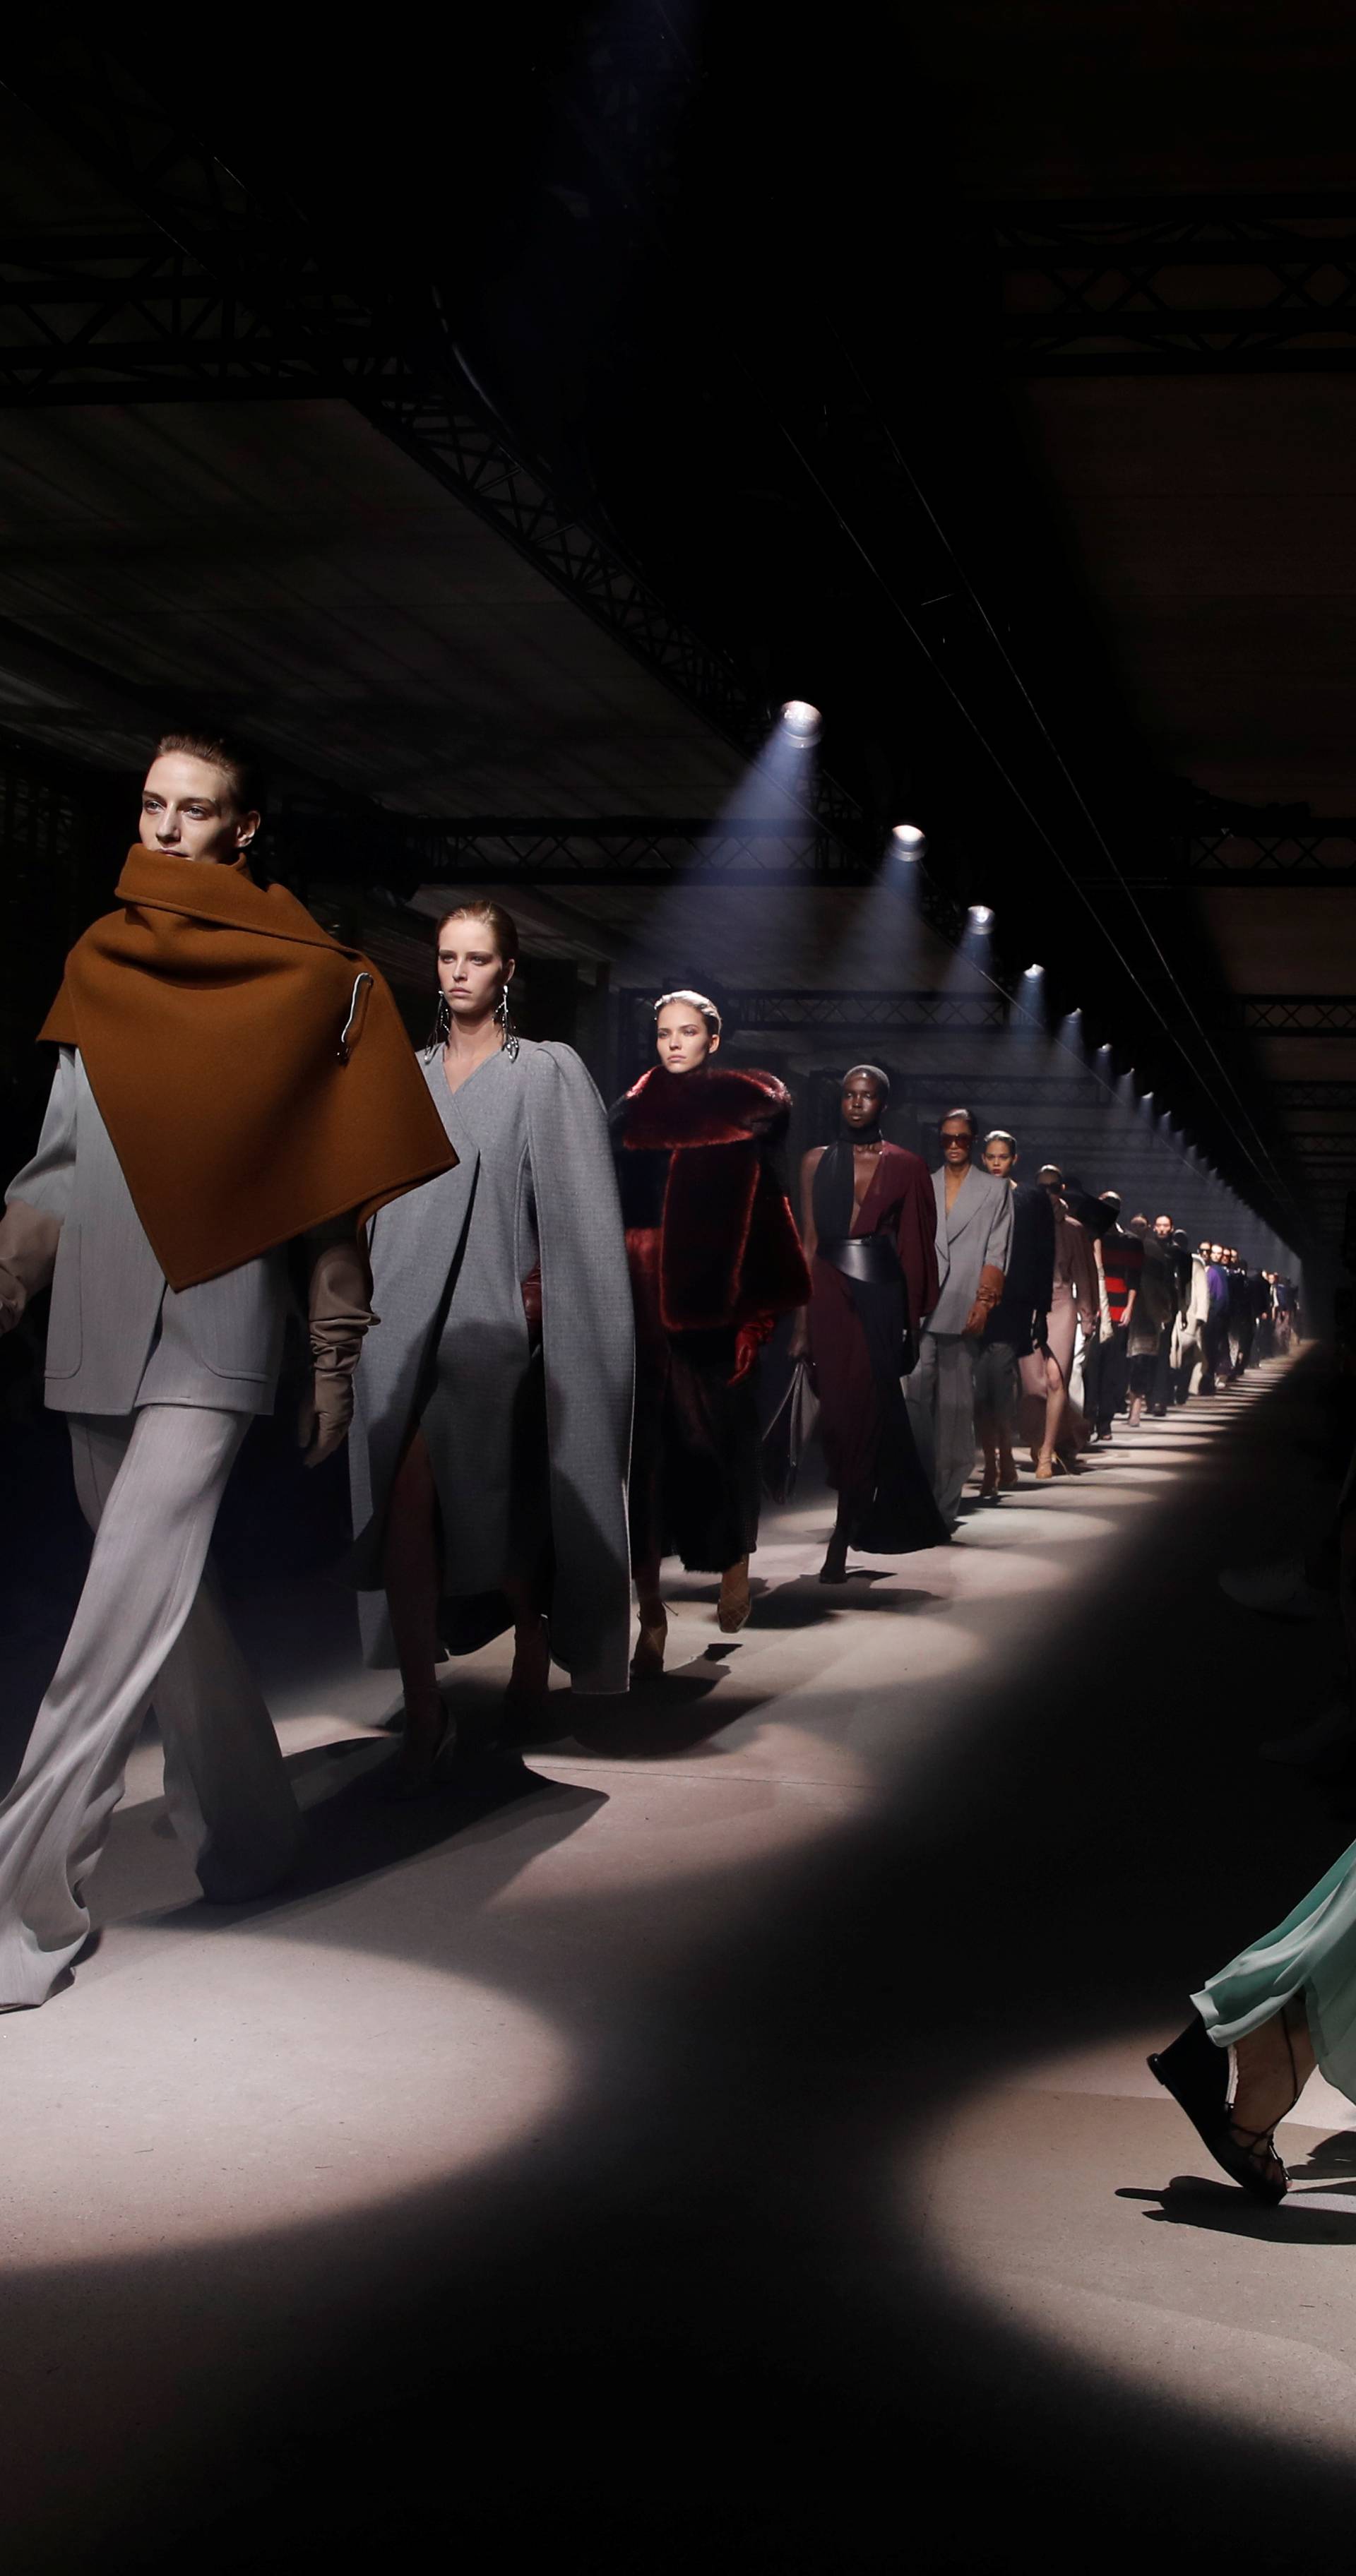 Givenchy's Fall/Winter 2020/21 show in Paris Fashion Week